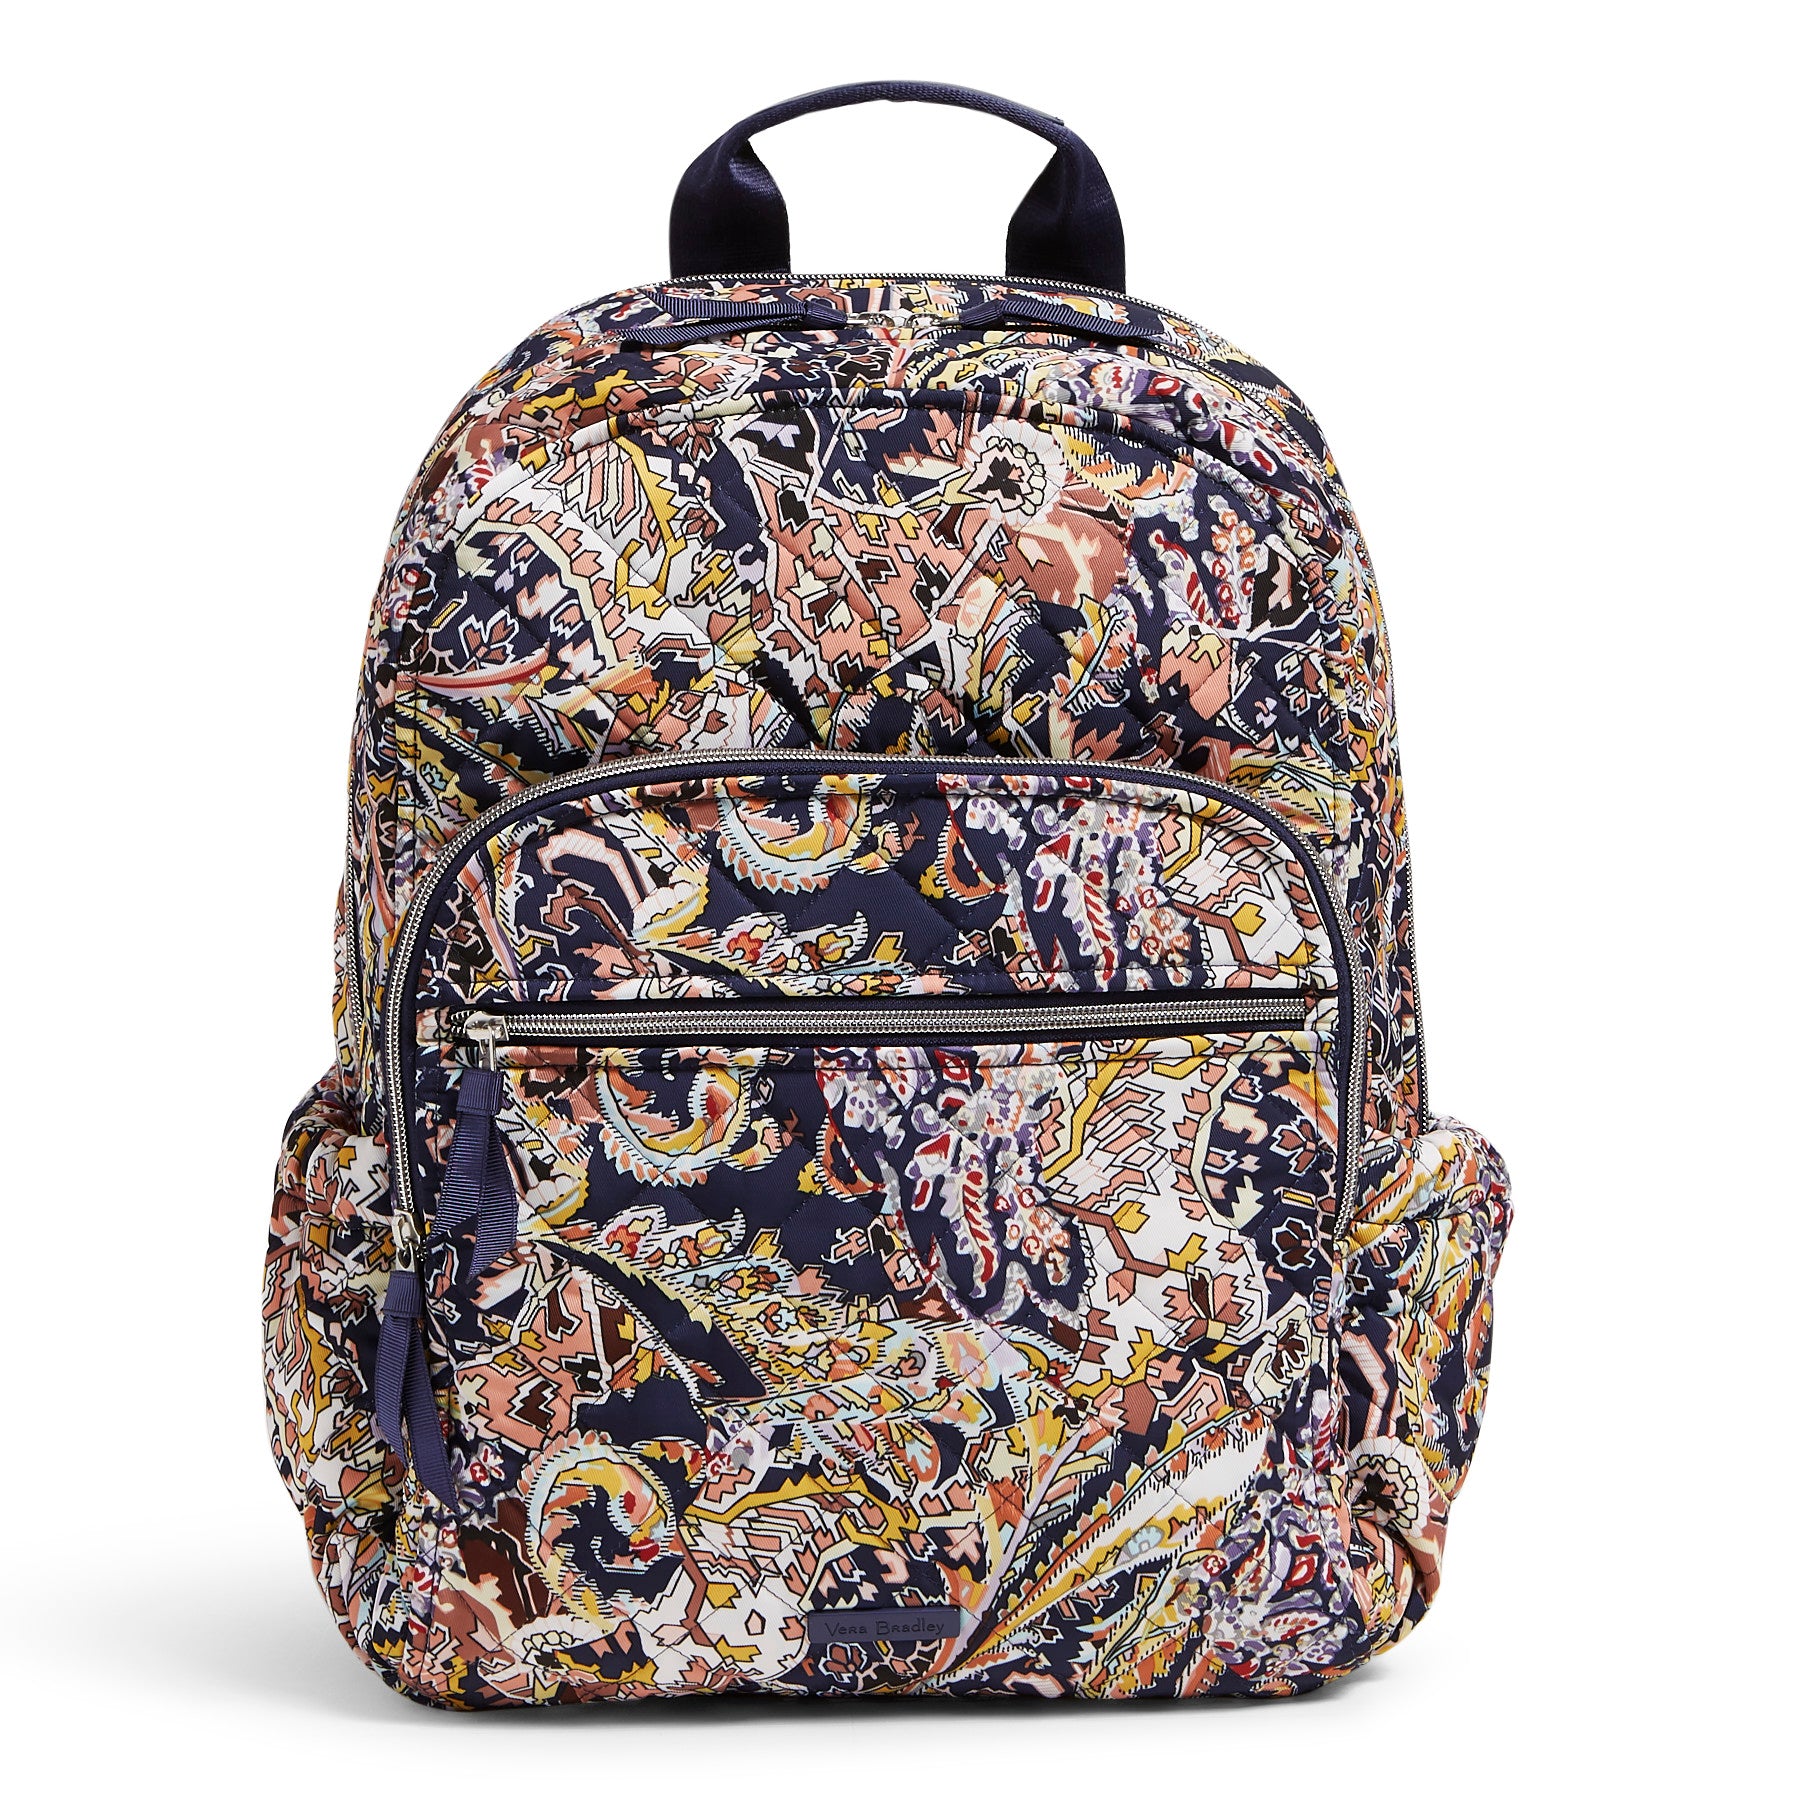 Blue Campus Backpack - Dreamer Paisley